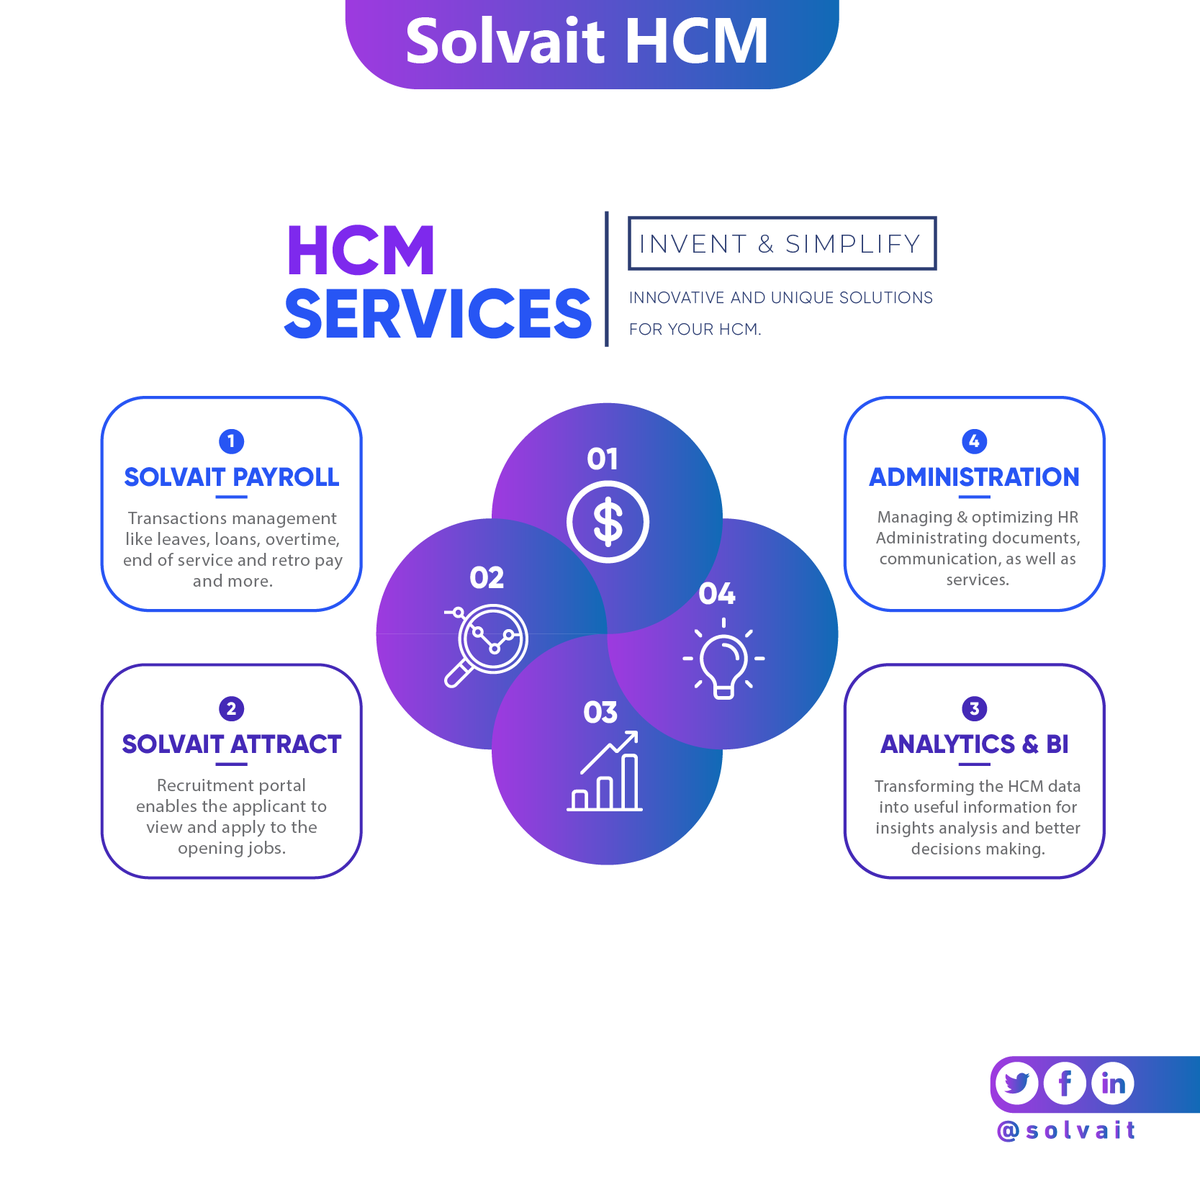 Our HCM services are comprehensive and customized to meet your needs. From hiring employees to retiring them, we can help you manage your entire HR pipeline!

#hiring #pipeline #help #hr #hcmtechnology #solvait #saudivision2030

#recuitment #serviceprovider